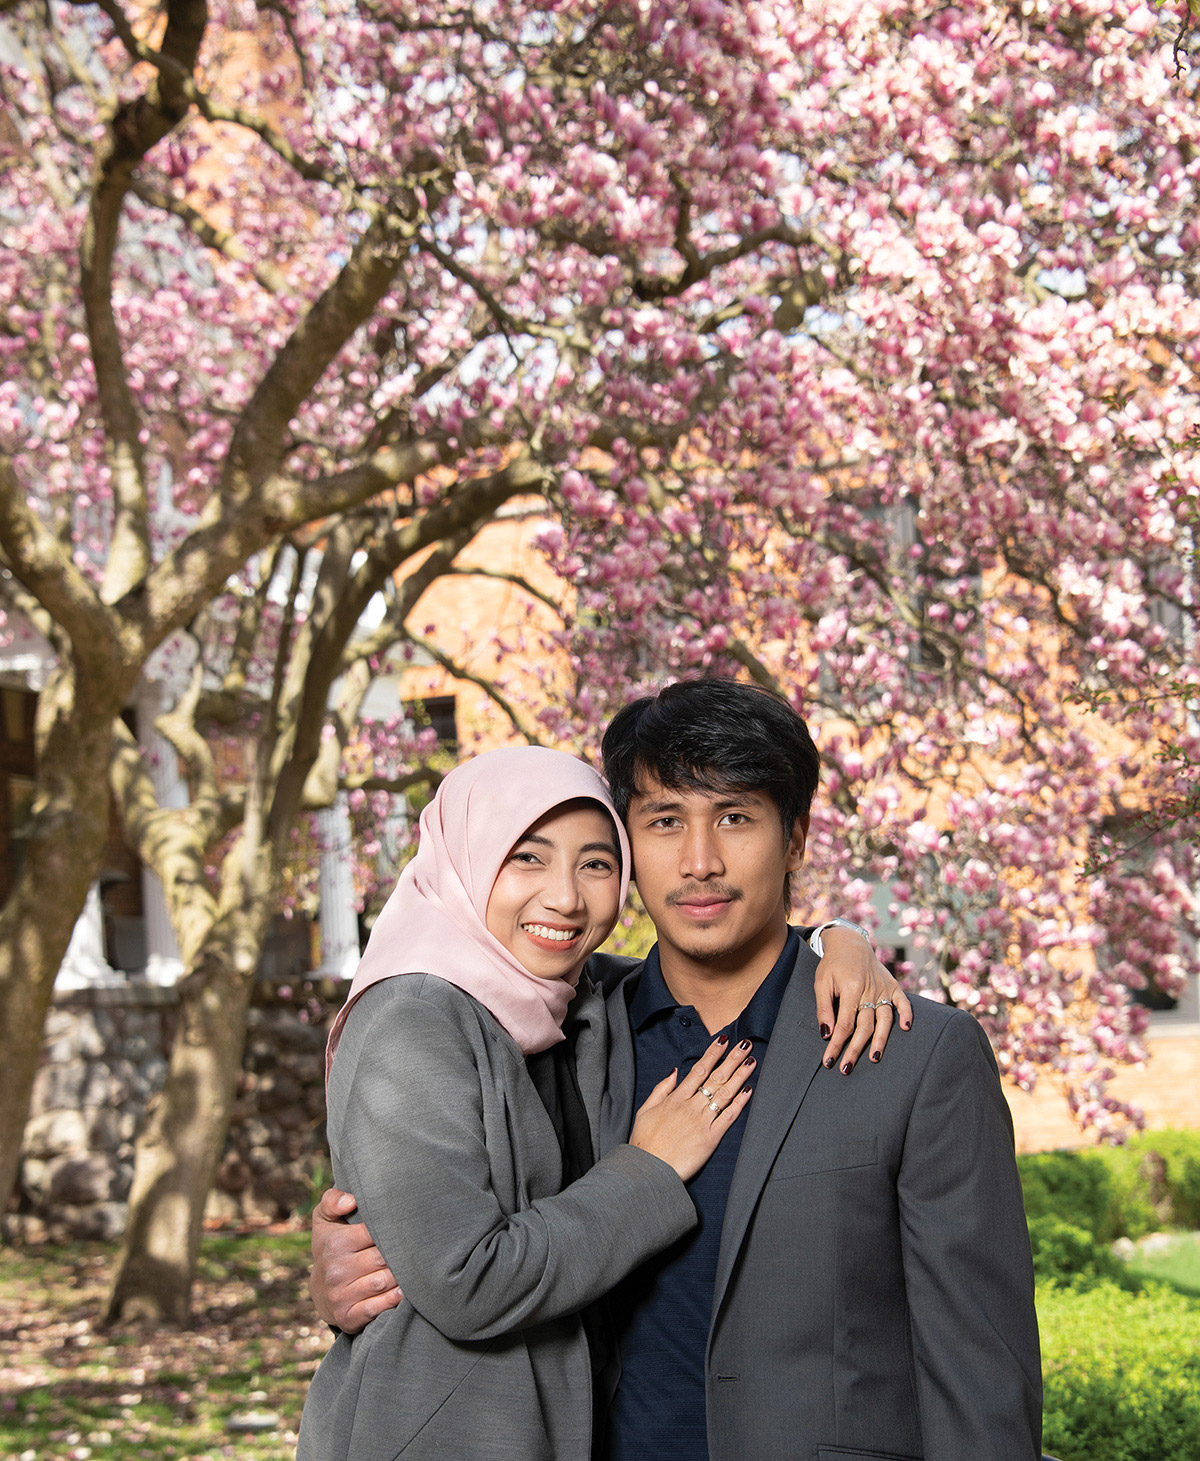 Couple in front of trees with pink blossoms